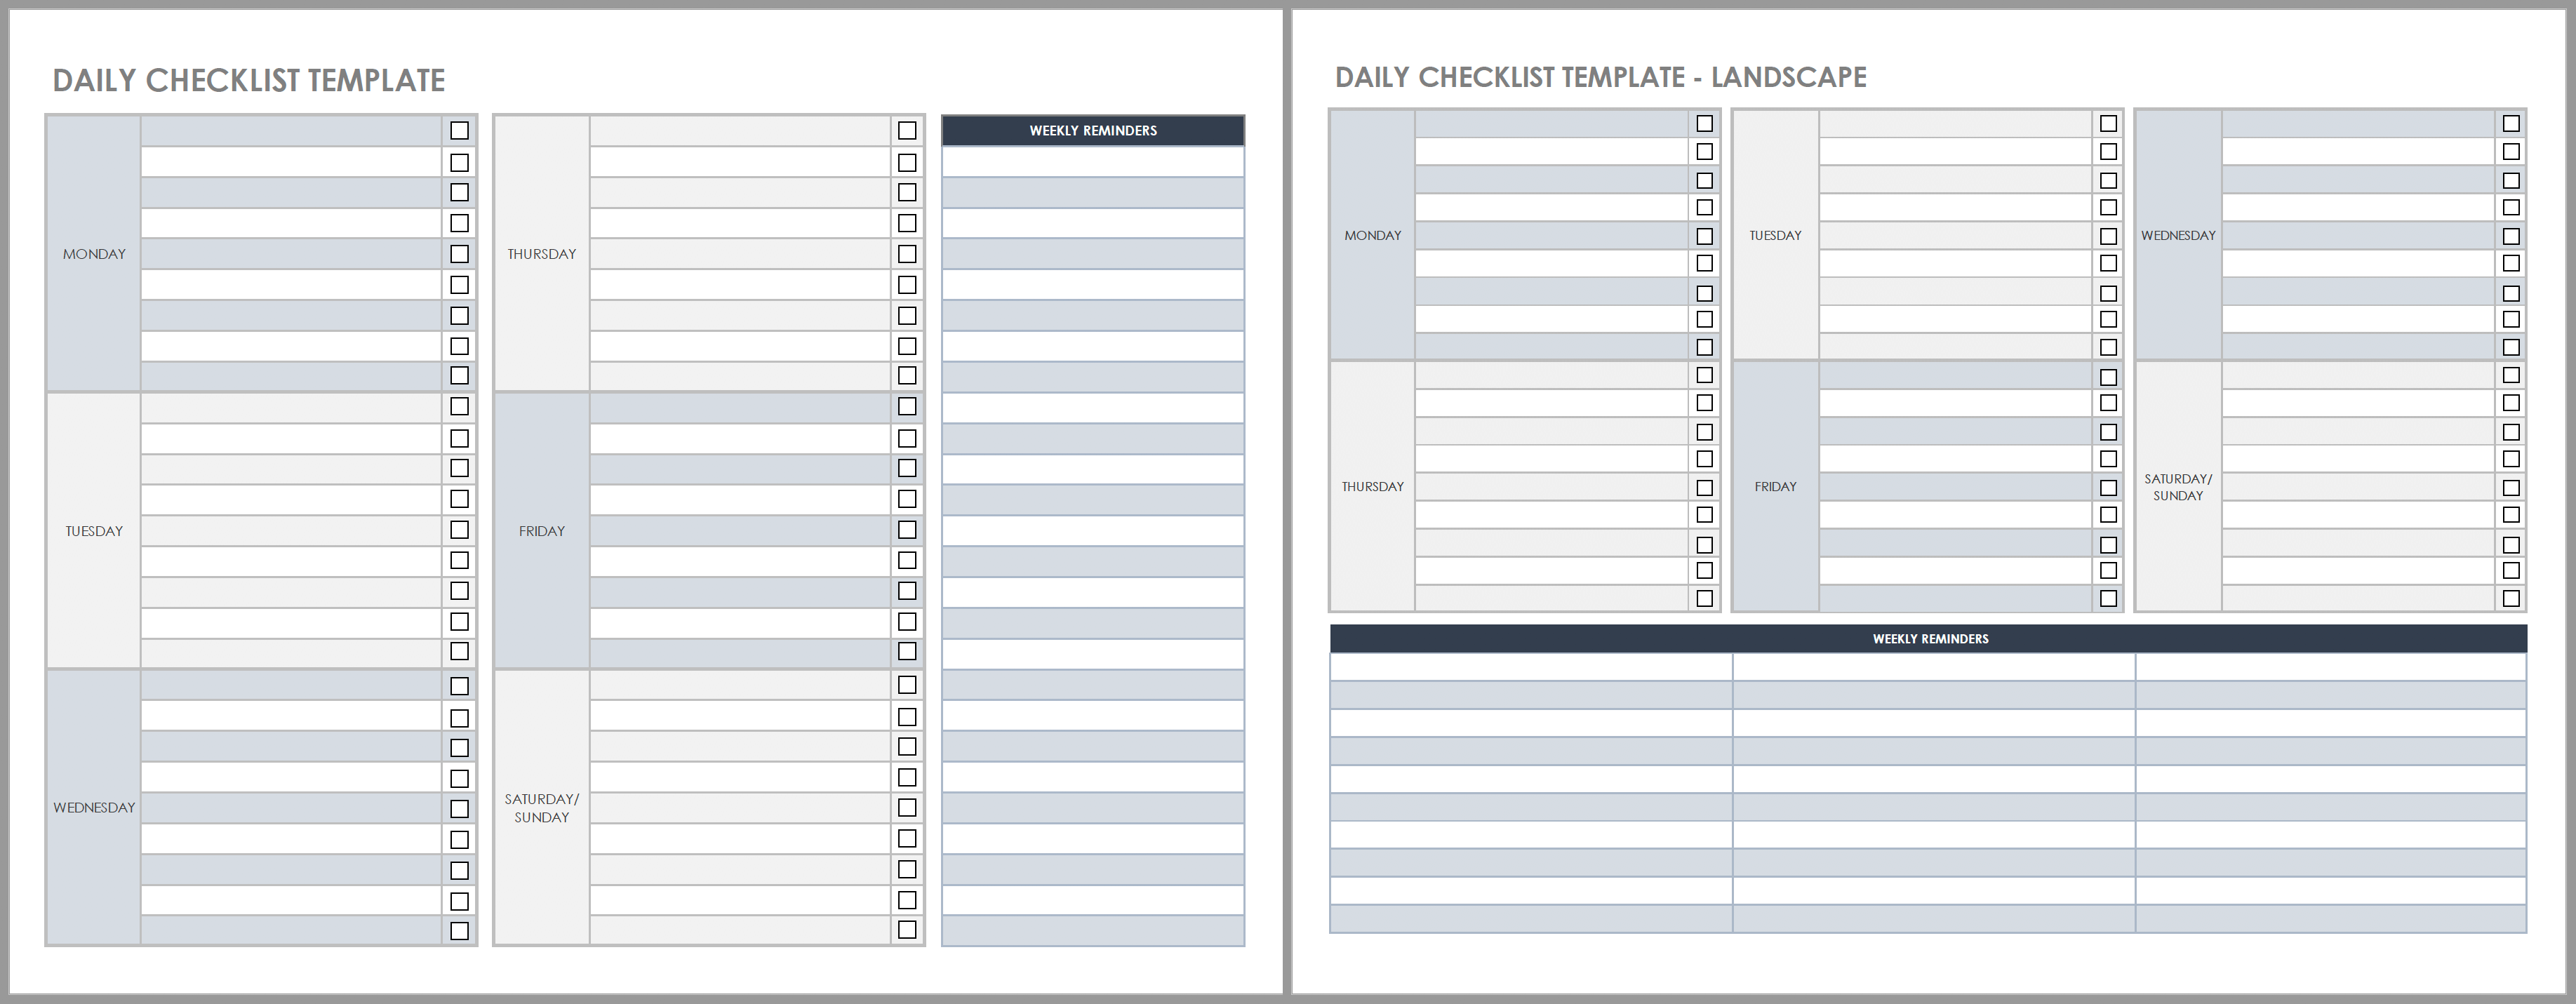 Free Daily Work Schedule Templates  Smartsheet Within Employee Daily Task Checklist Template With Regard To Employee Daily Task Checklist Template